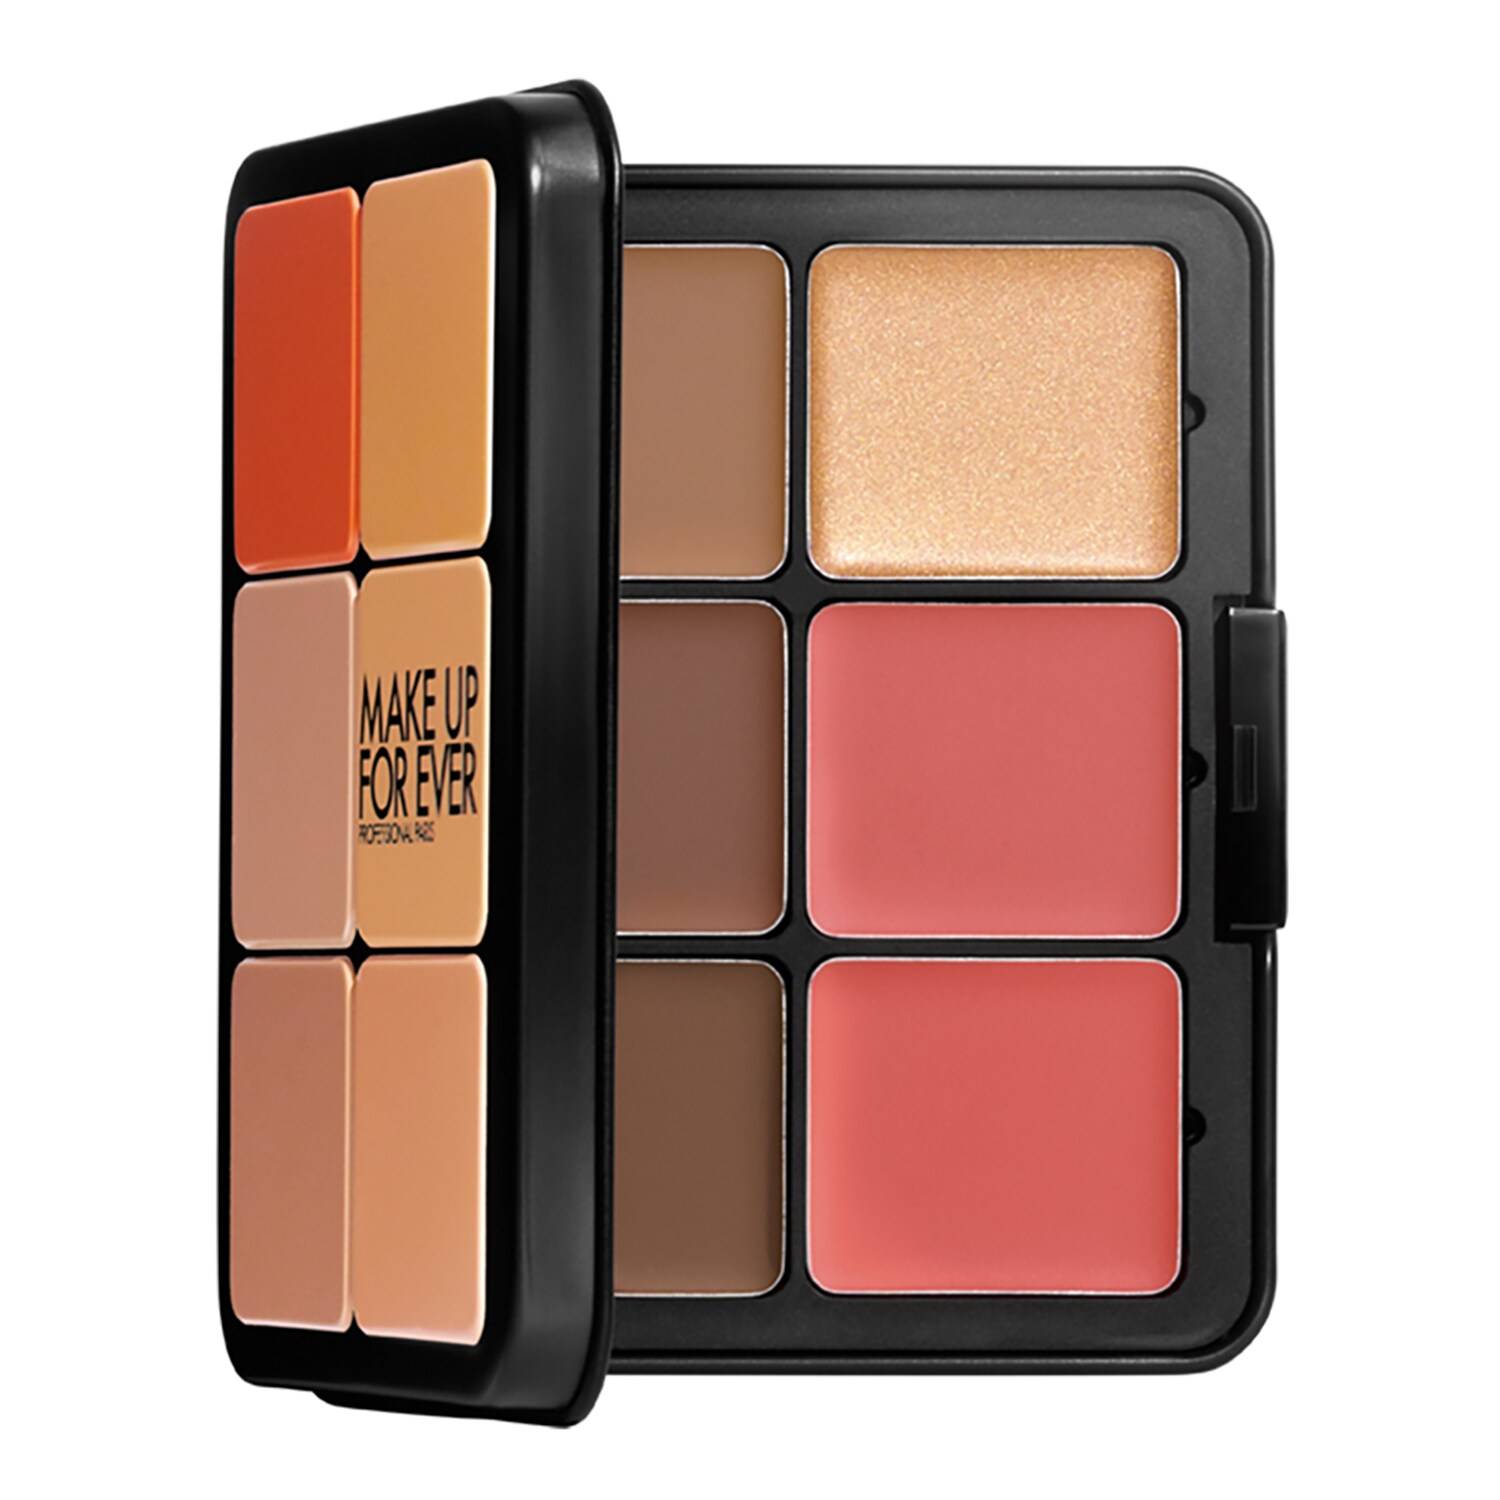 Make Up For Ever Hd Skin All-In-One Palette Harmony 2 26.5G